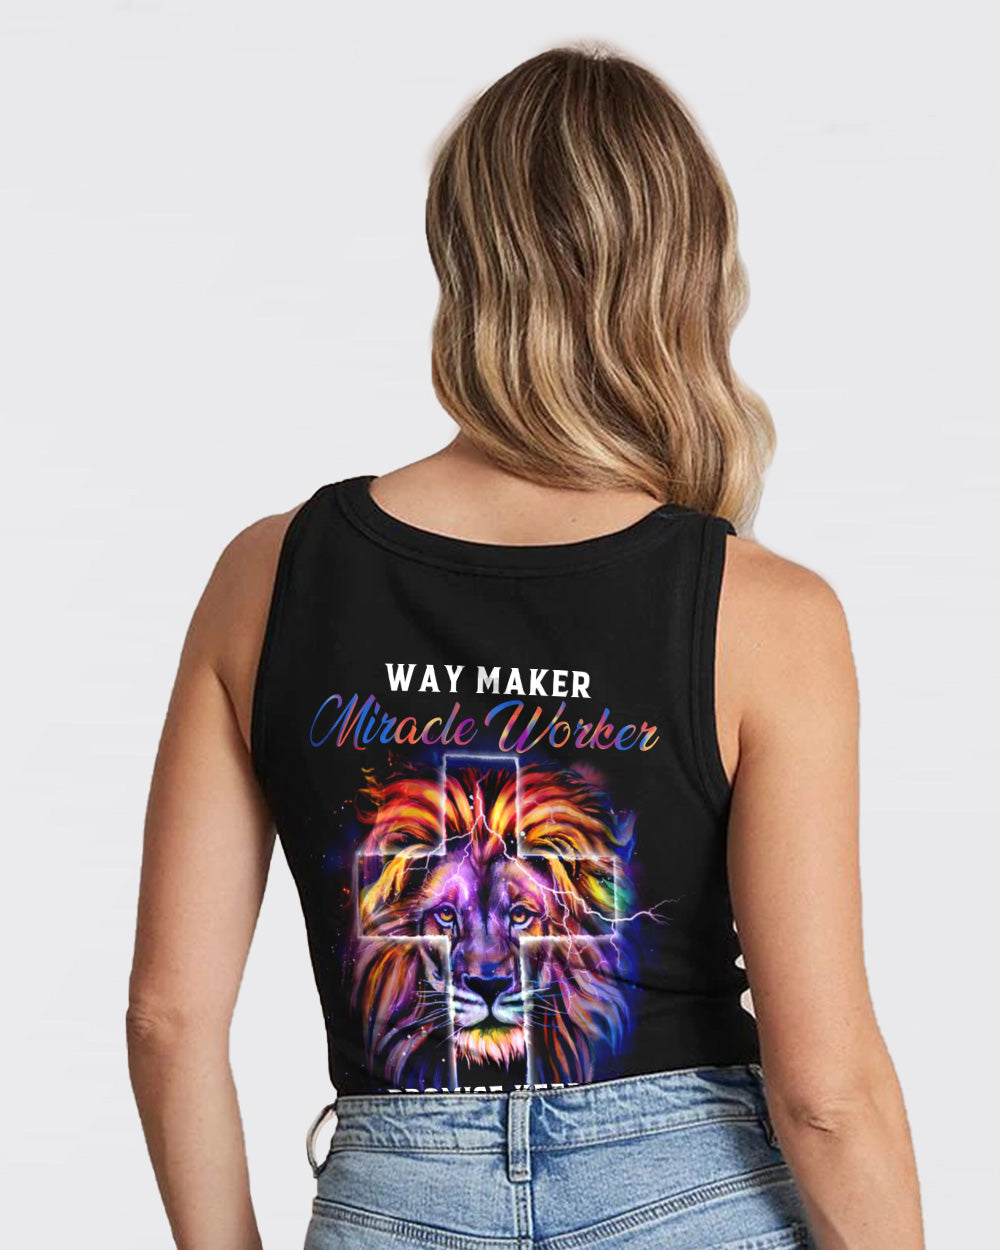 Way Maker Miracle Worker Colorful Lion Faith Heart Beat Women's Christian Tanks